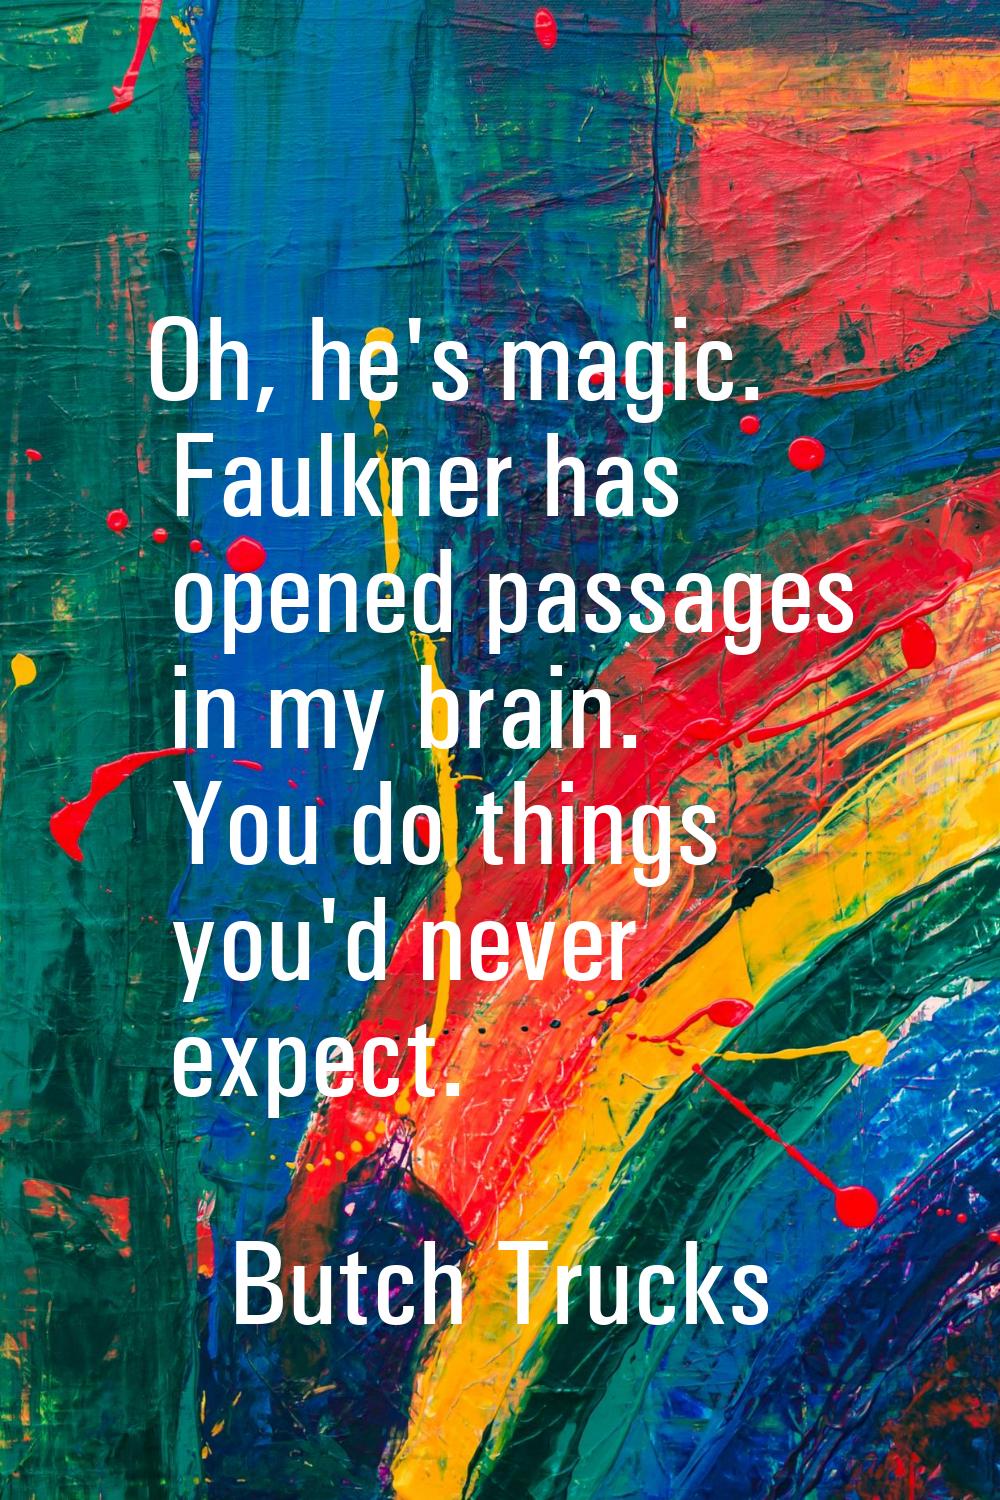 Oh, he's magic. Faulkner has opened passages in my brain. You do things you'd never expect.